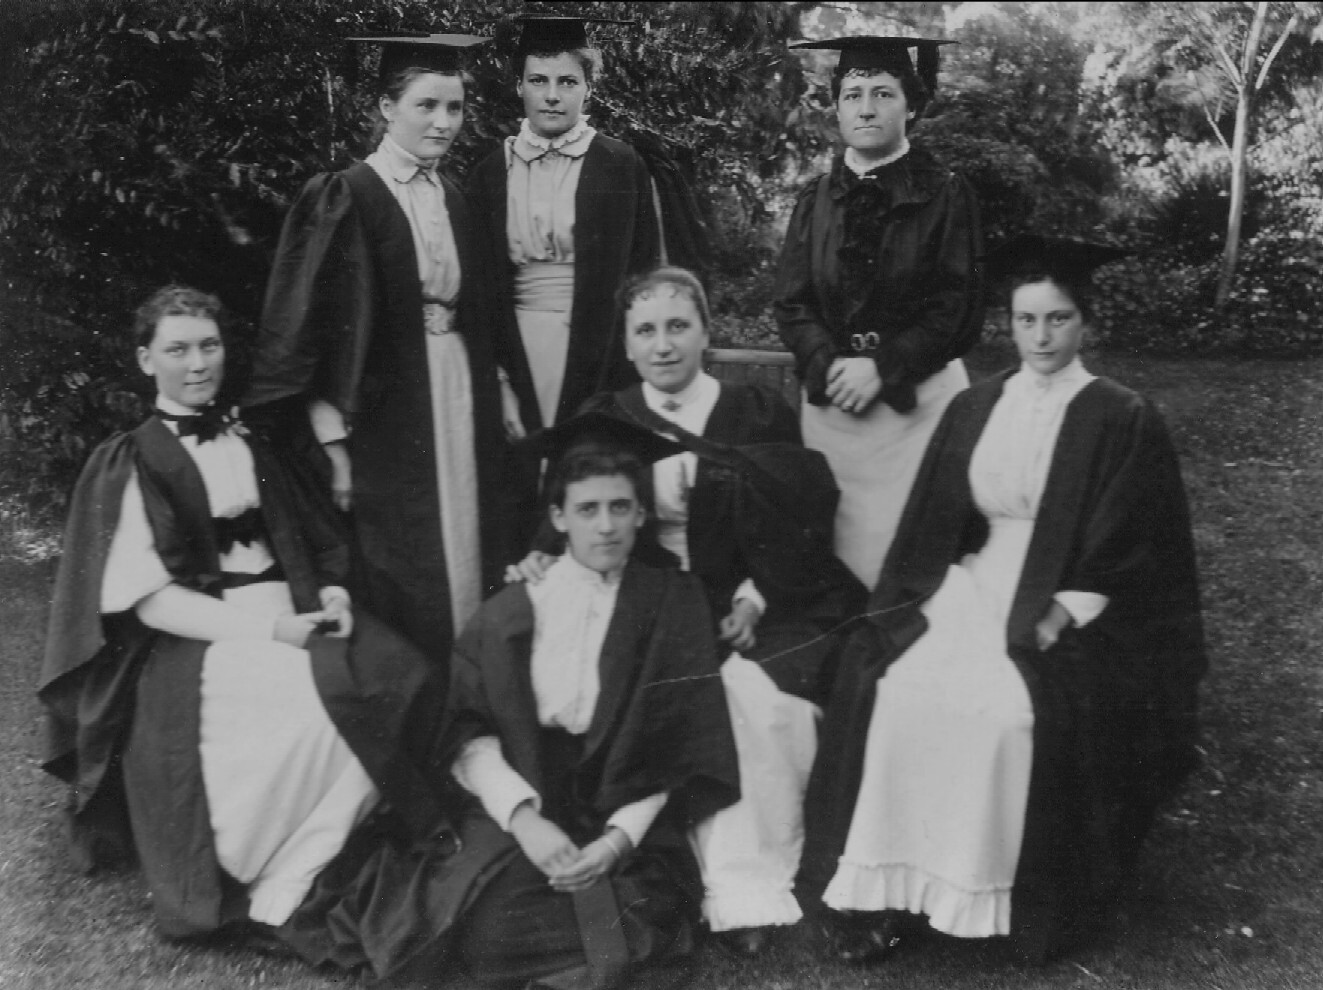 LOUISA MACDONALD AND GROUP OF WOMEN STUDENTS AT WOMEN'S COLLEGE, STRATHMORE AT GLEBE (?)